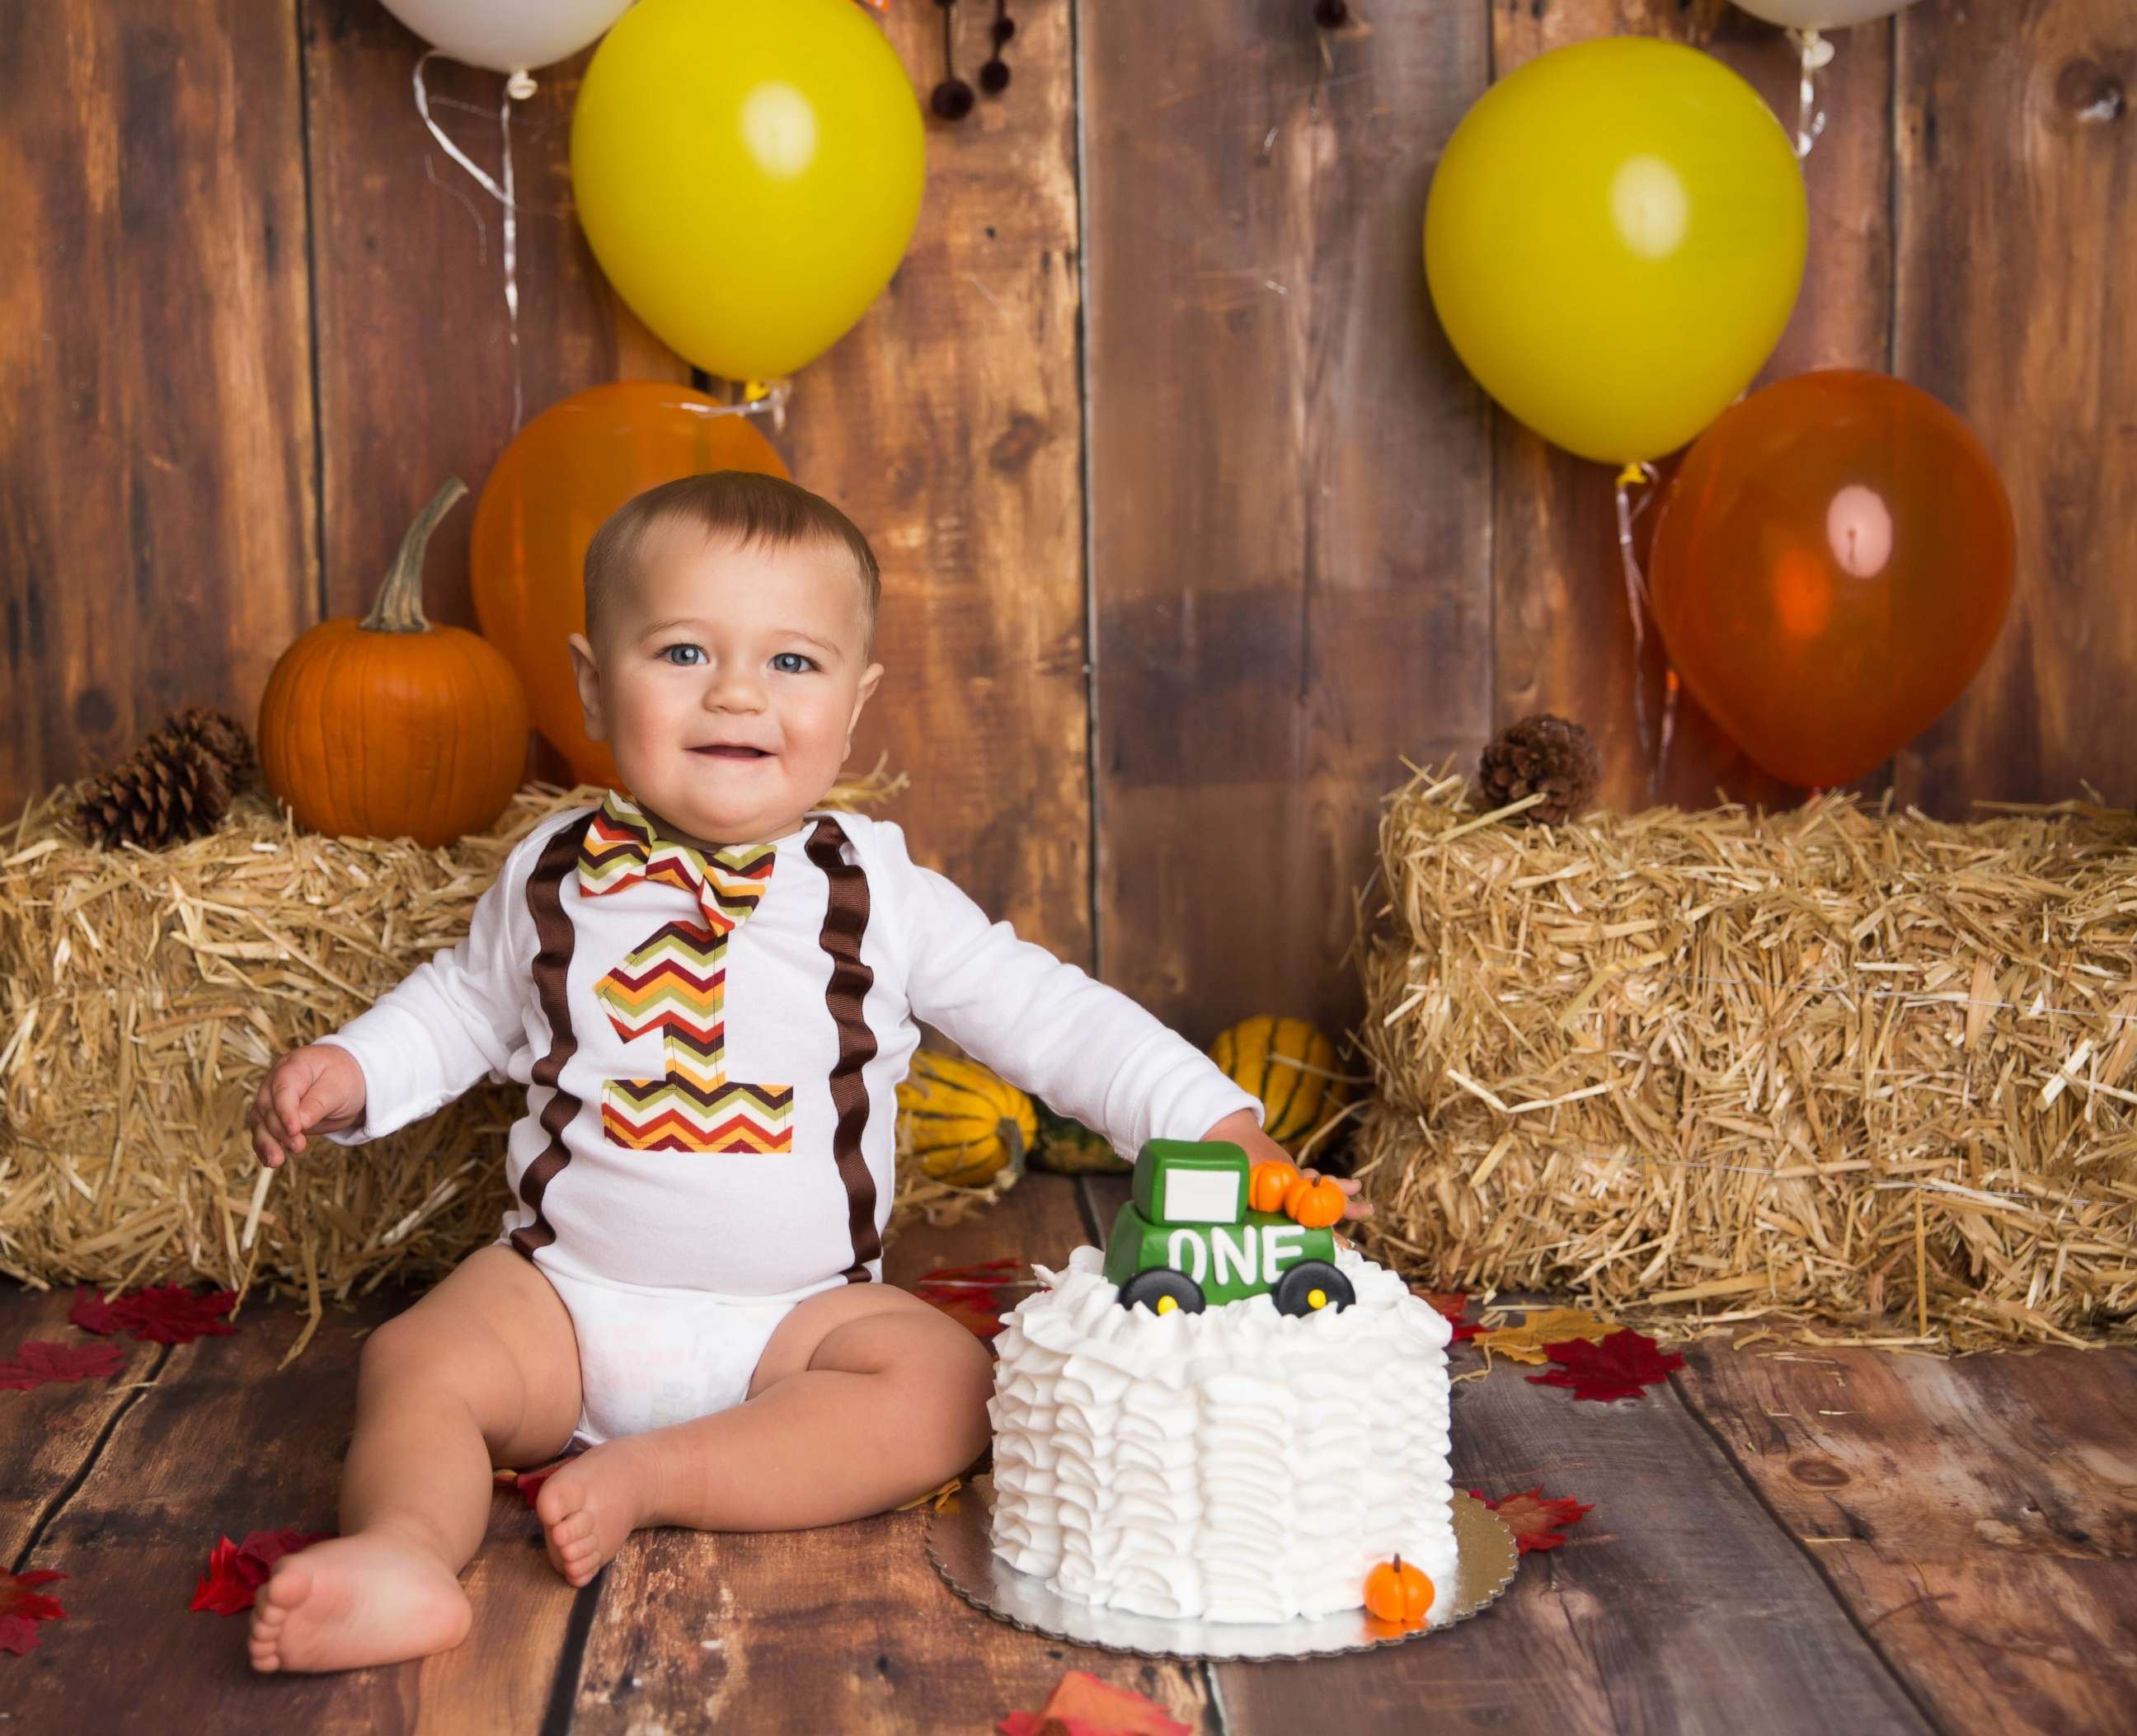 PHOTO: Luca DiMartino of Long Island, New York, turns 1-year-old on Thanksgiving day this year.